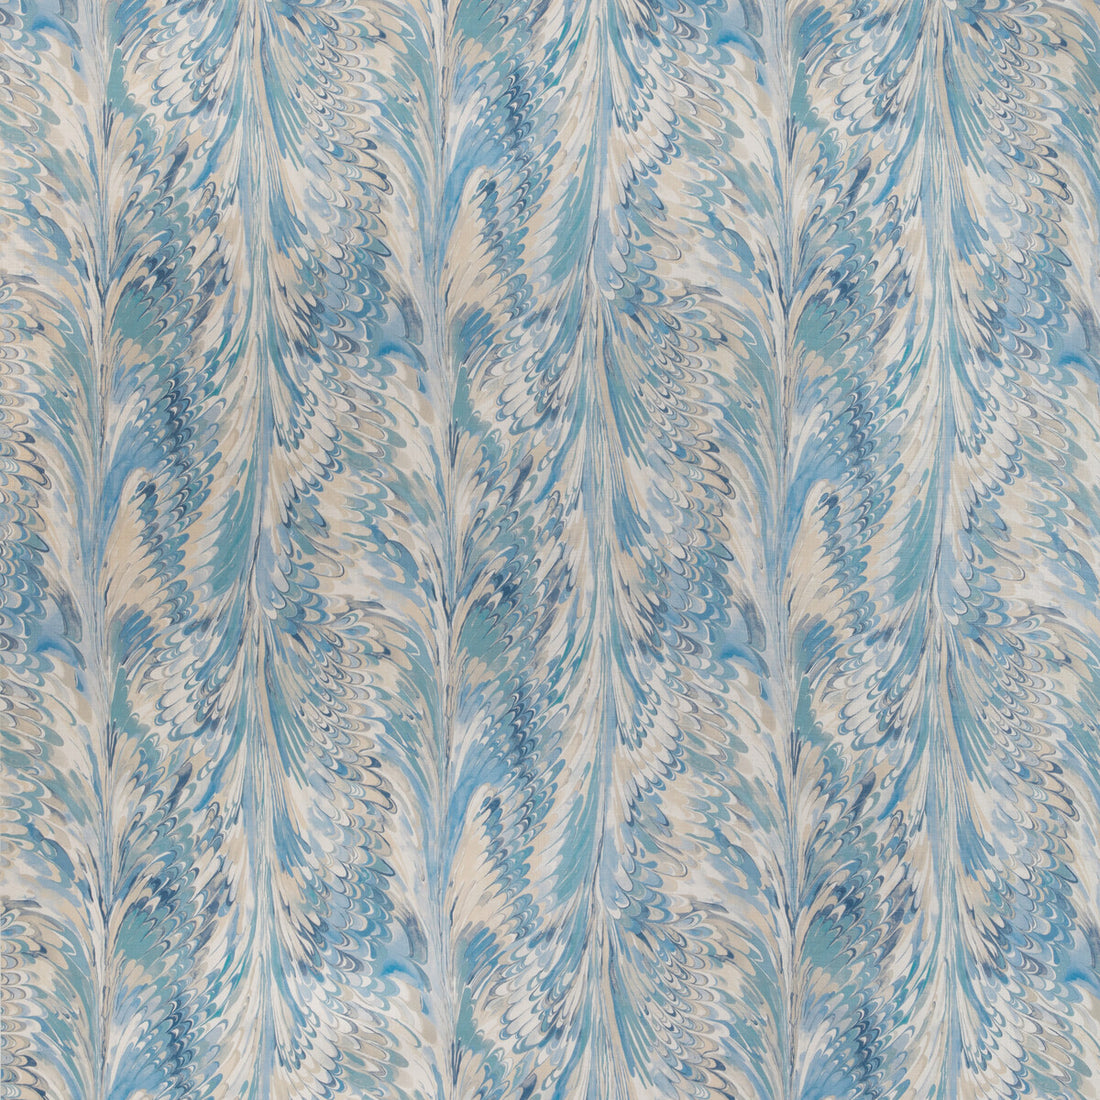 Taplow Print fabric in capri/sky color - pattern 2019114.55.0 - by Lee Jofa in the Garden Walk collection